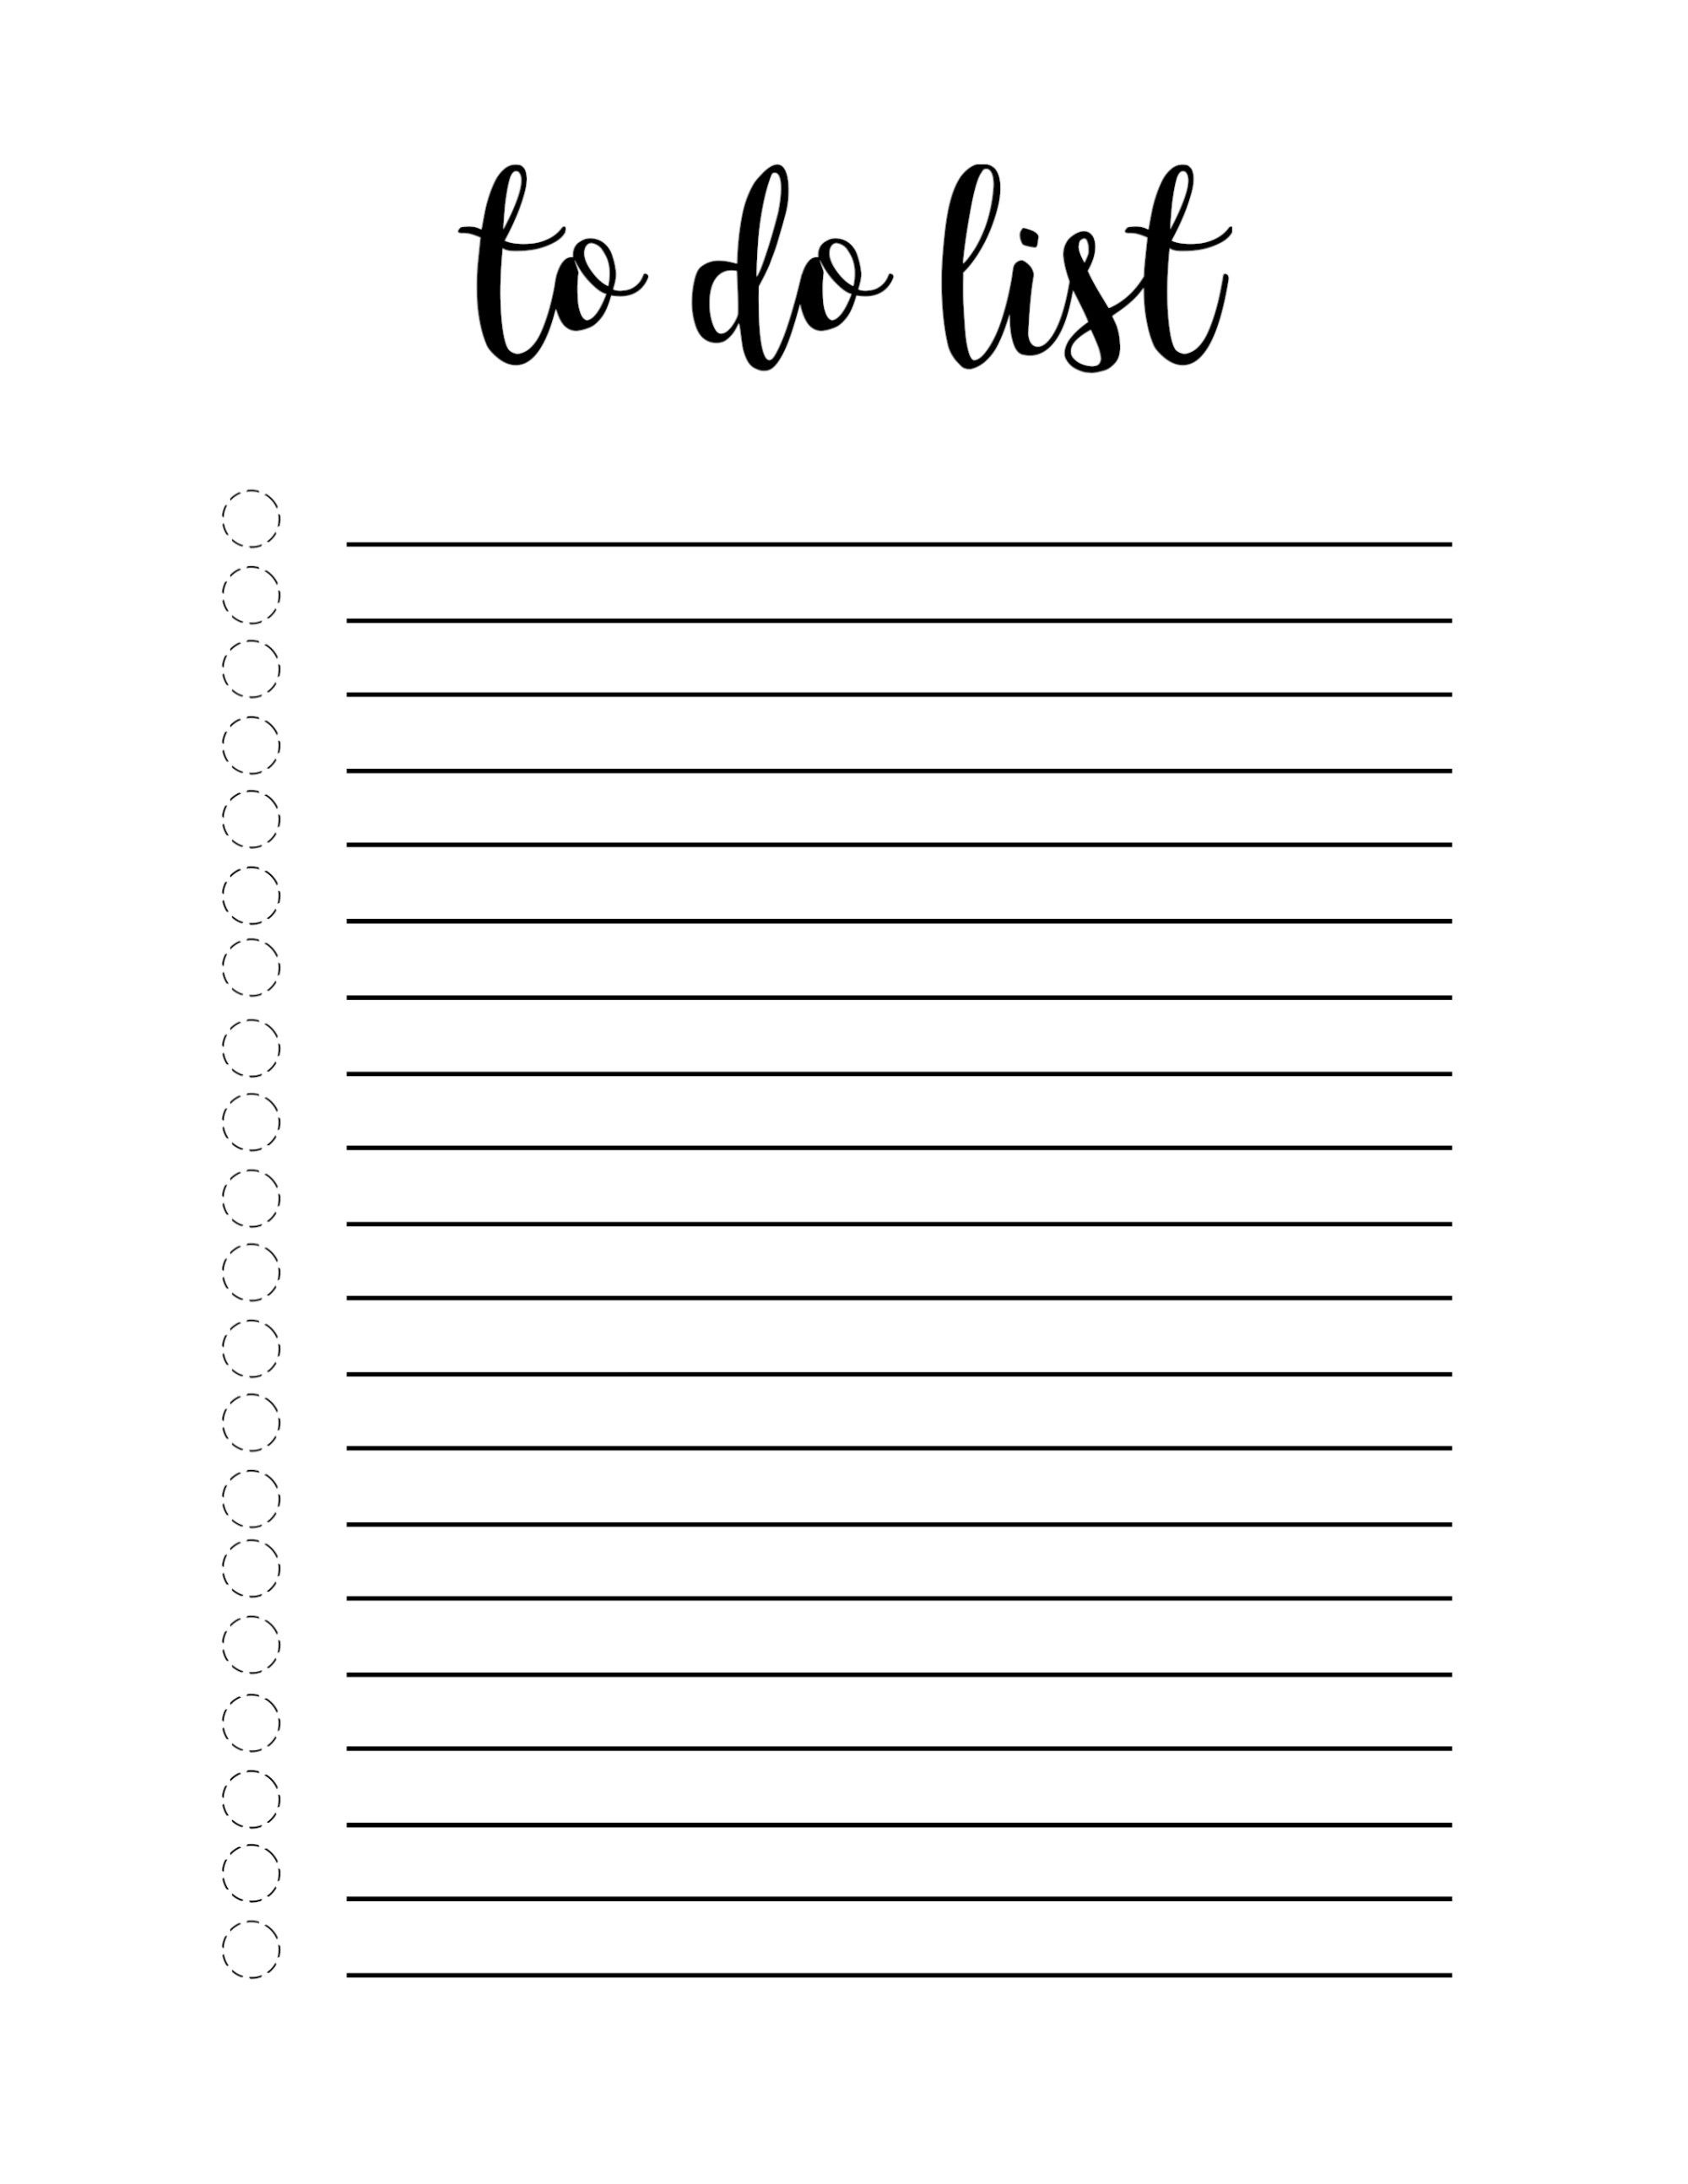 Free Printable To Do List Template | Making Notebooks | Todo List - Free Printable To Do List